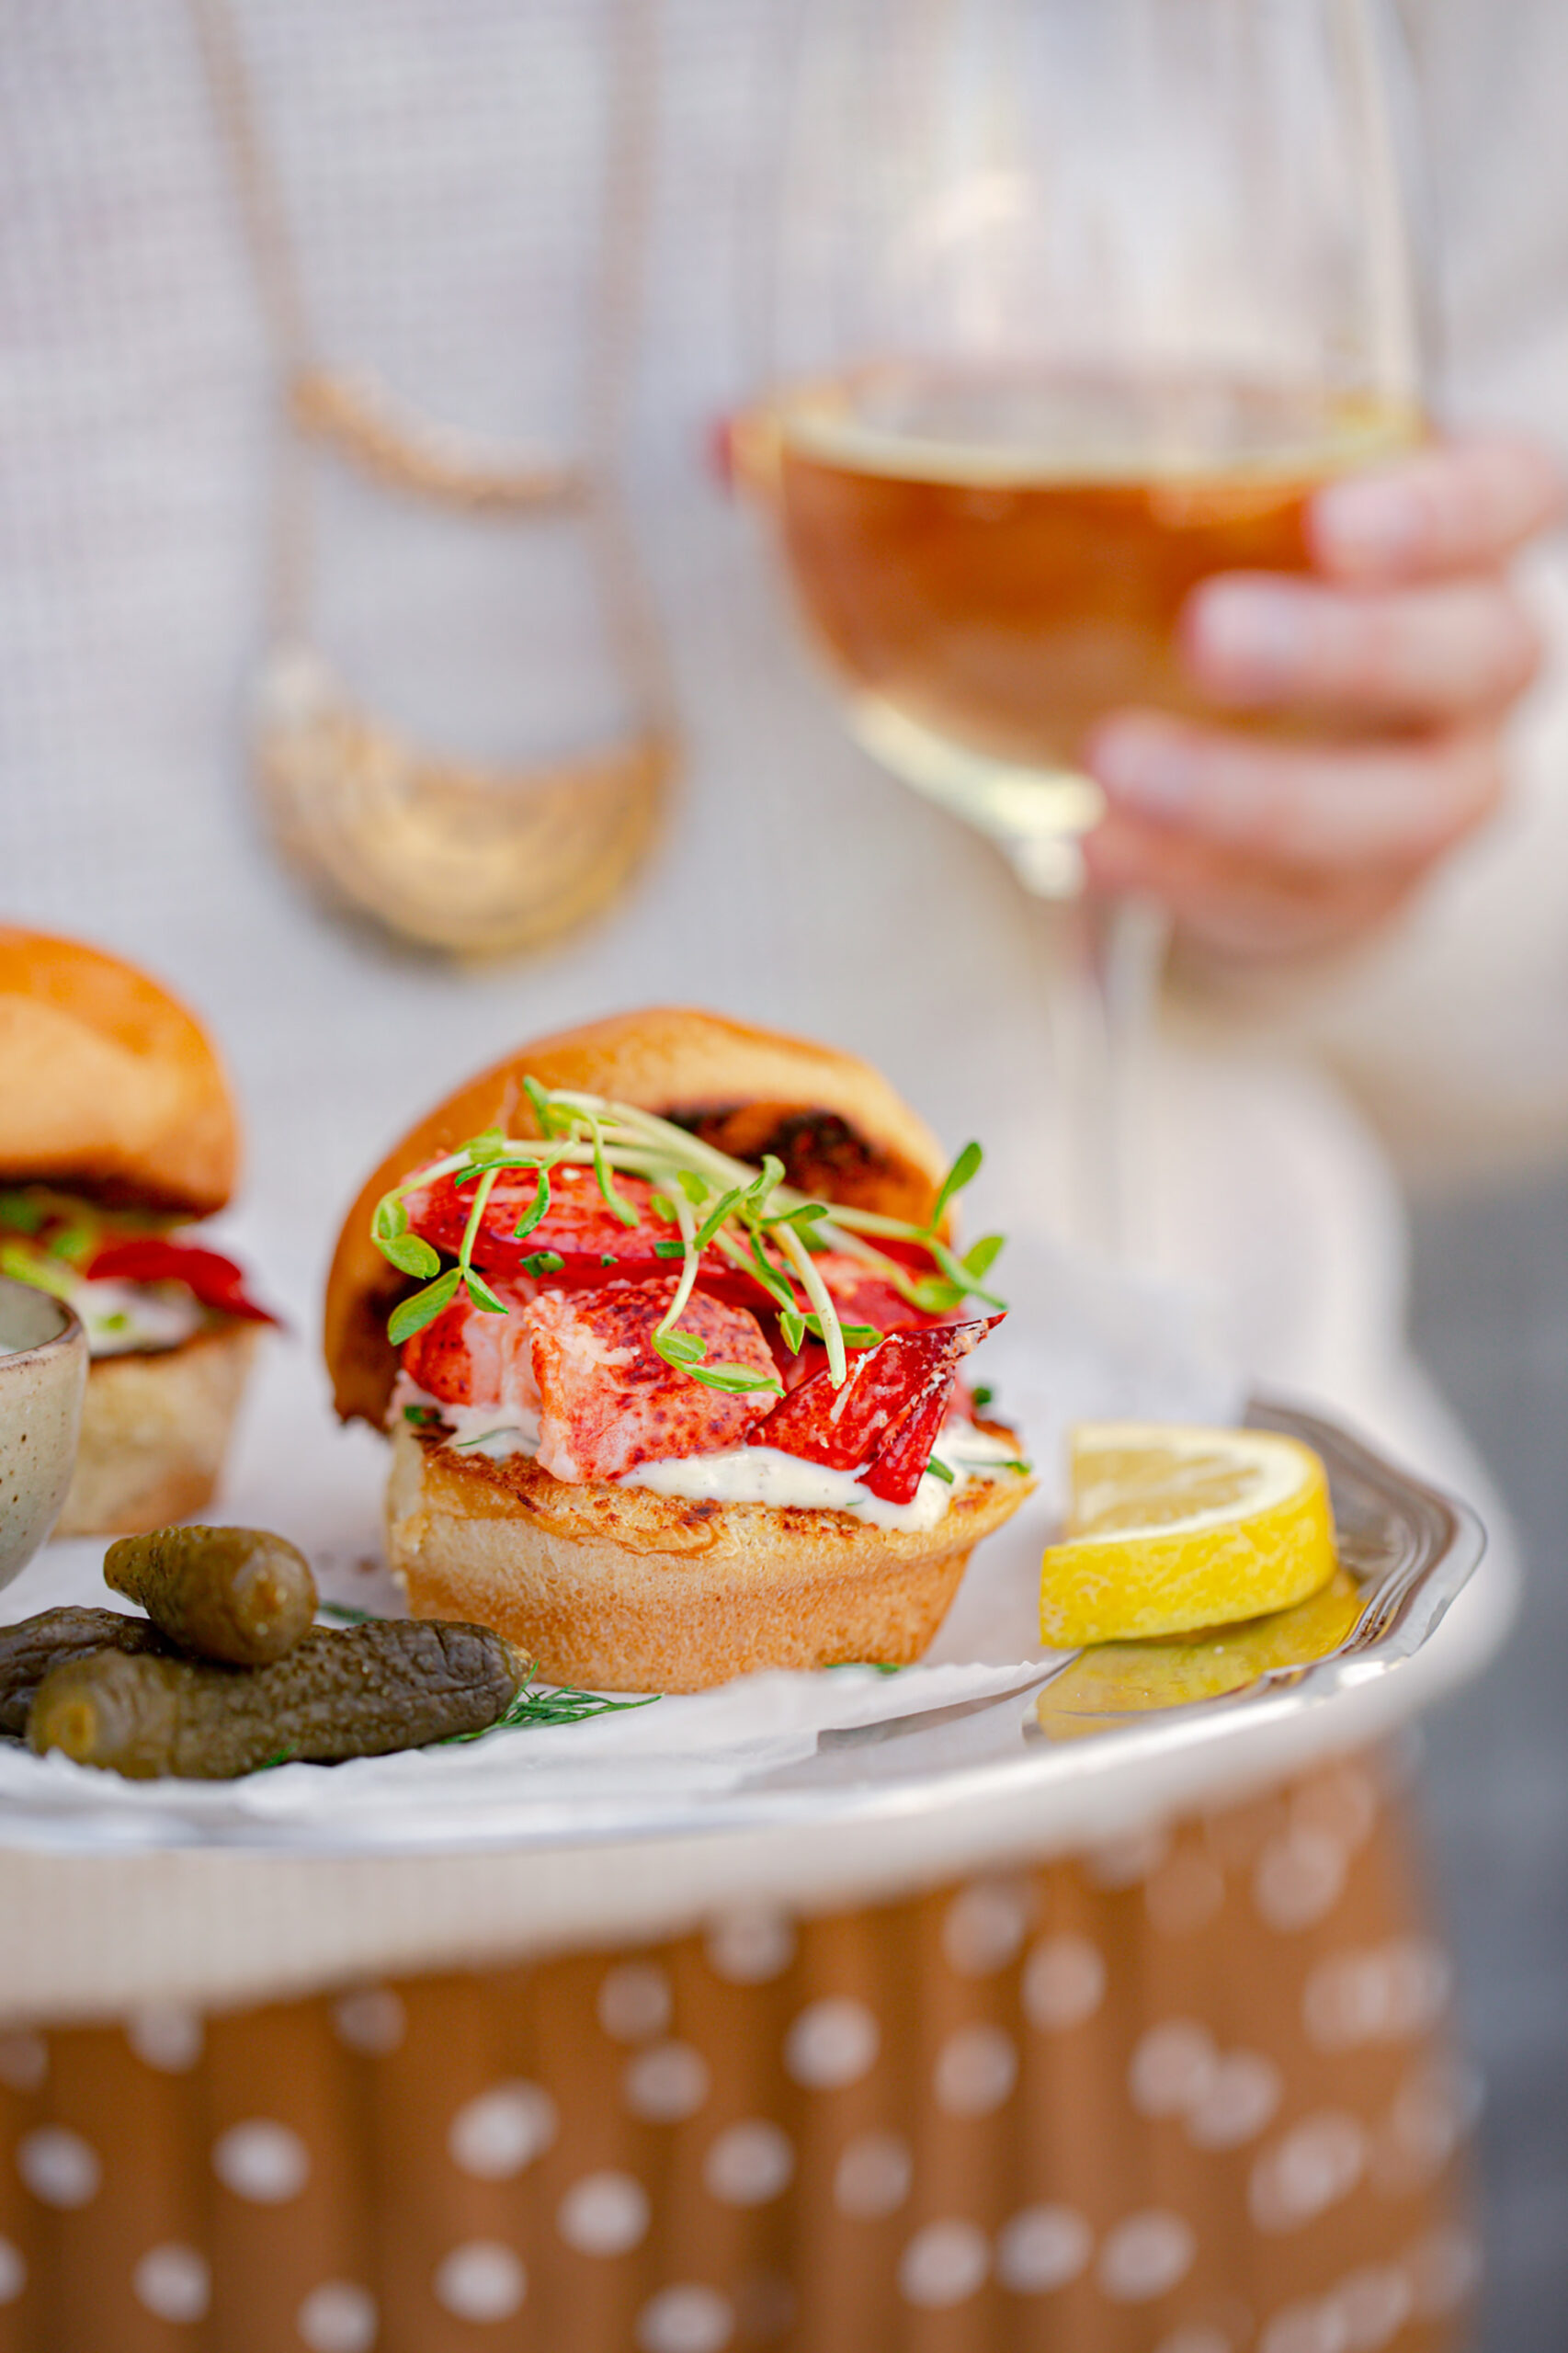 Lobster Sliders with Y Series Viognier Béarnaise Mayonnaise